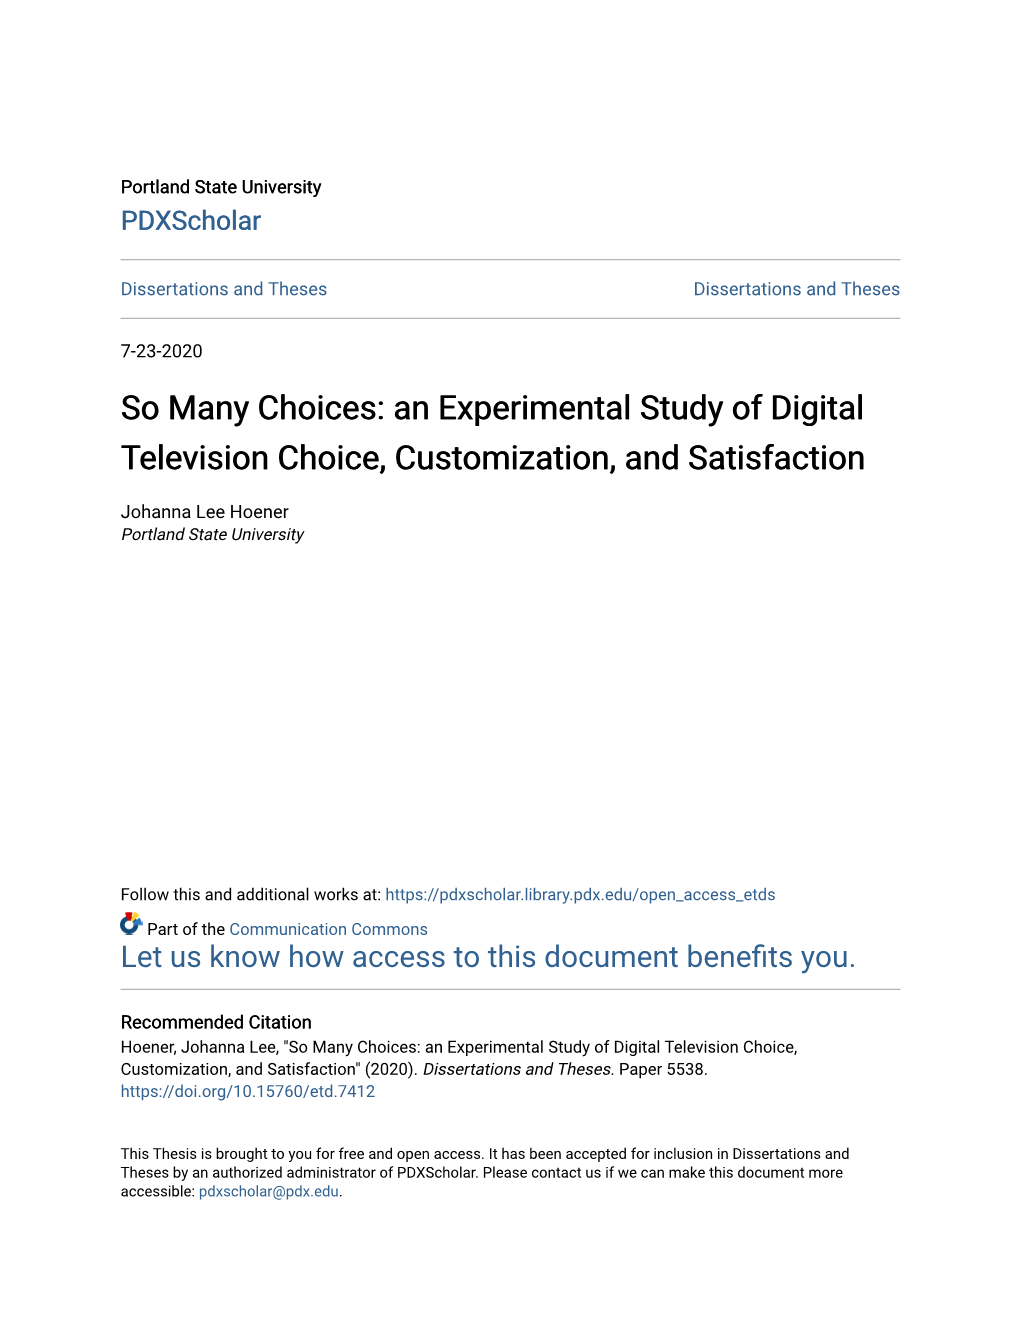 An Experimental Study of Digital Television Choice, Customization, and Satisfaction